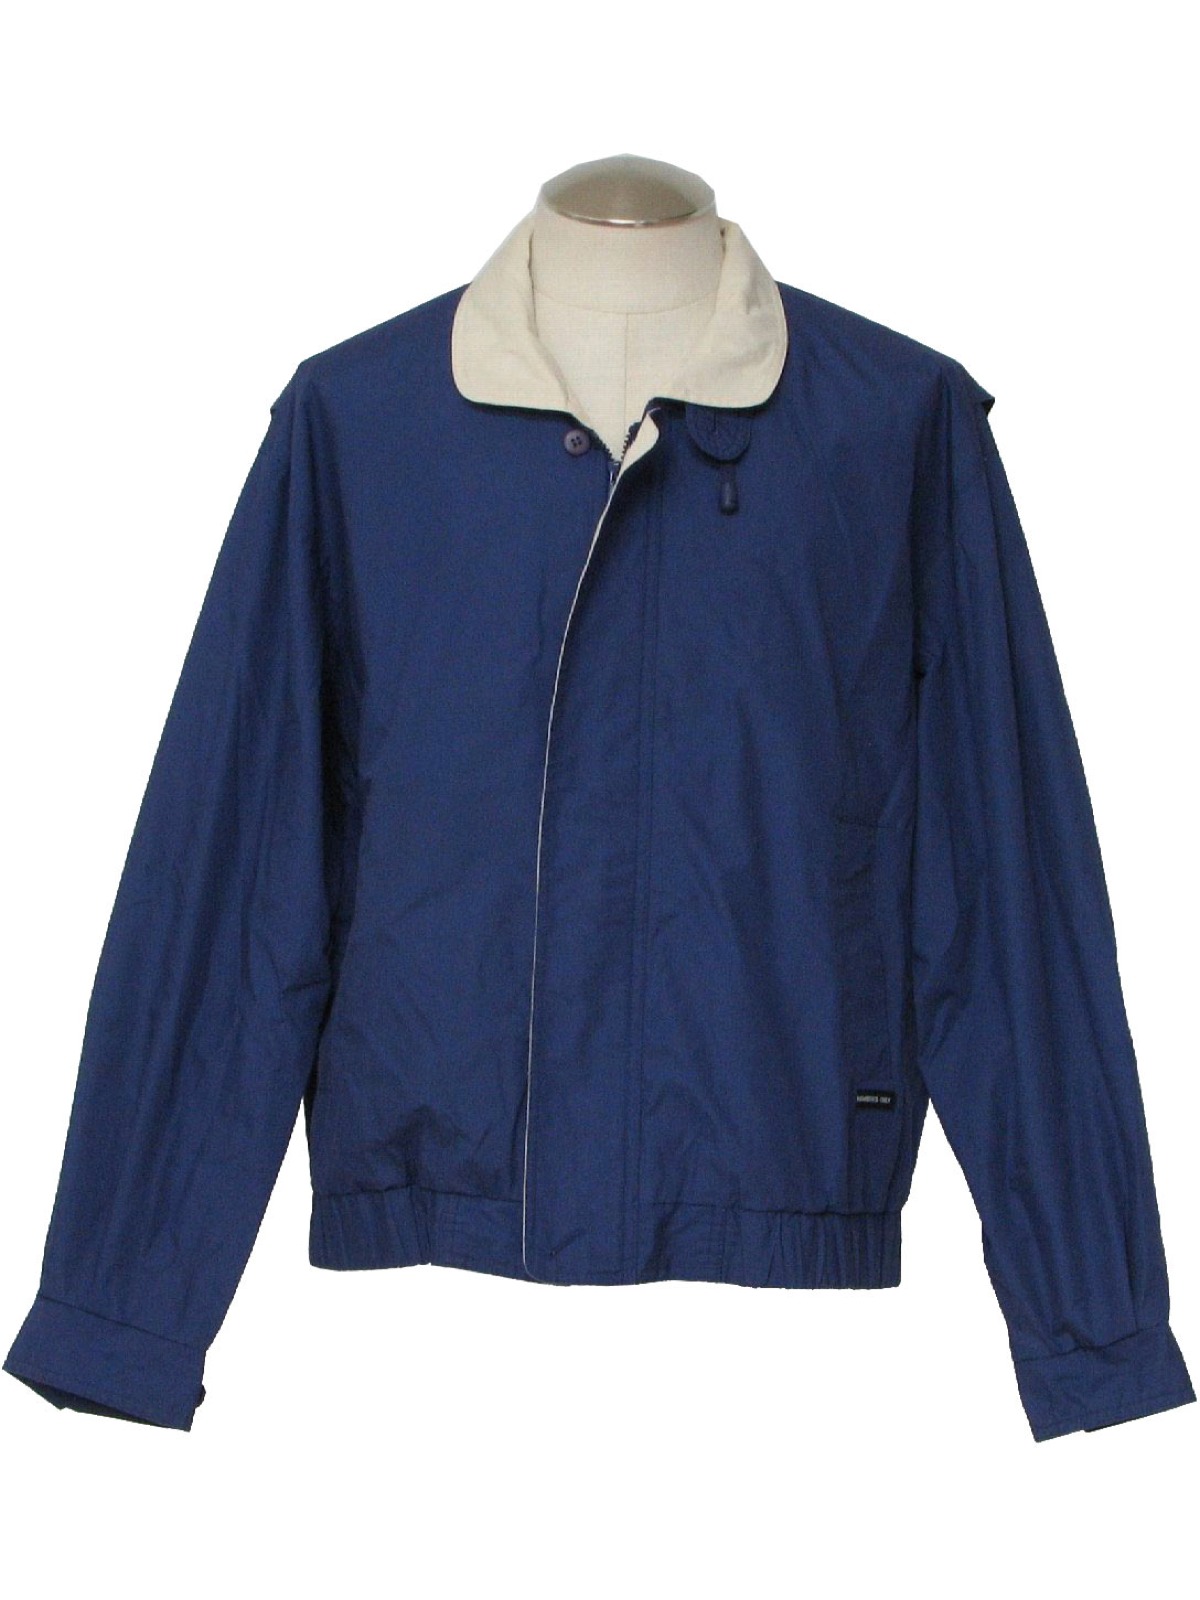 80's Vintage Jacket: 80s -Members Only- Mens navy cotton polyester ...